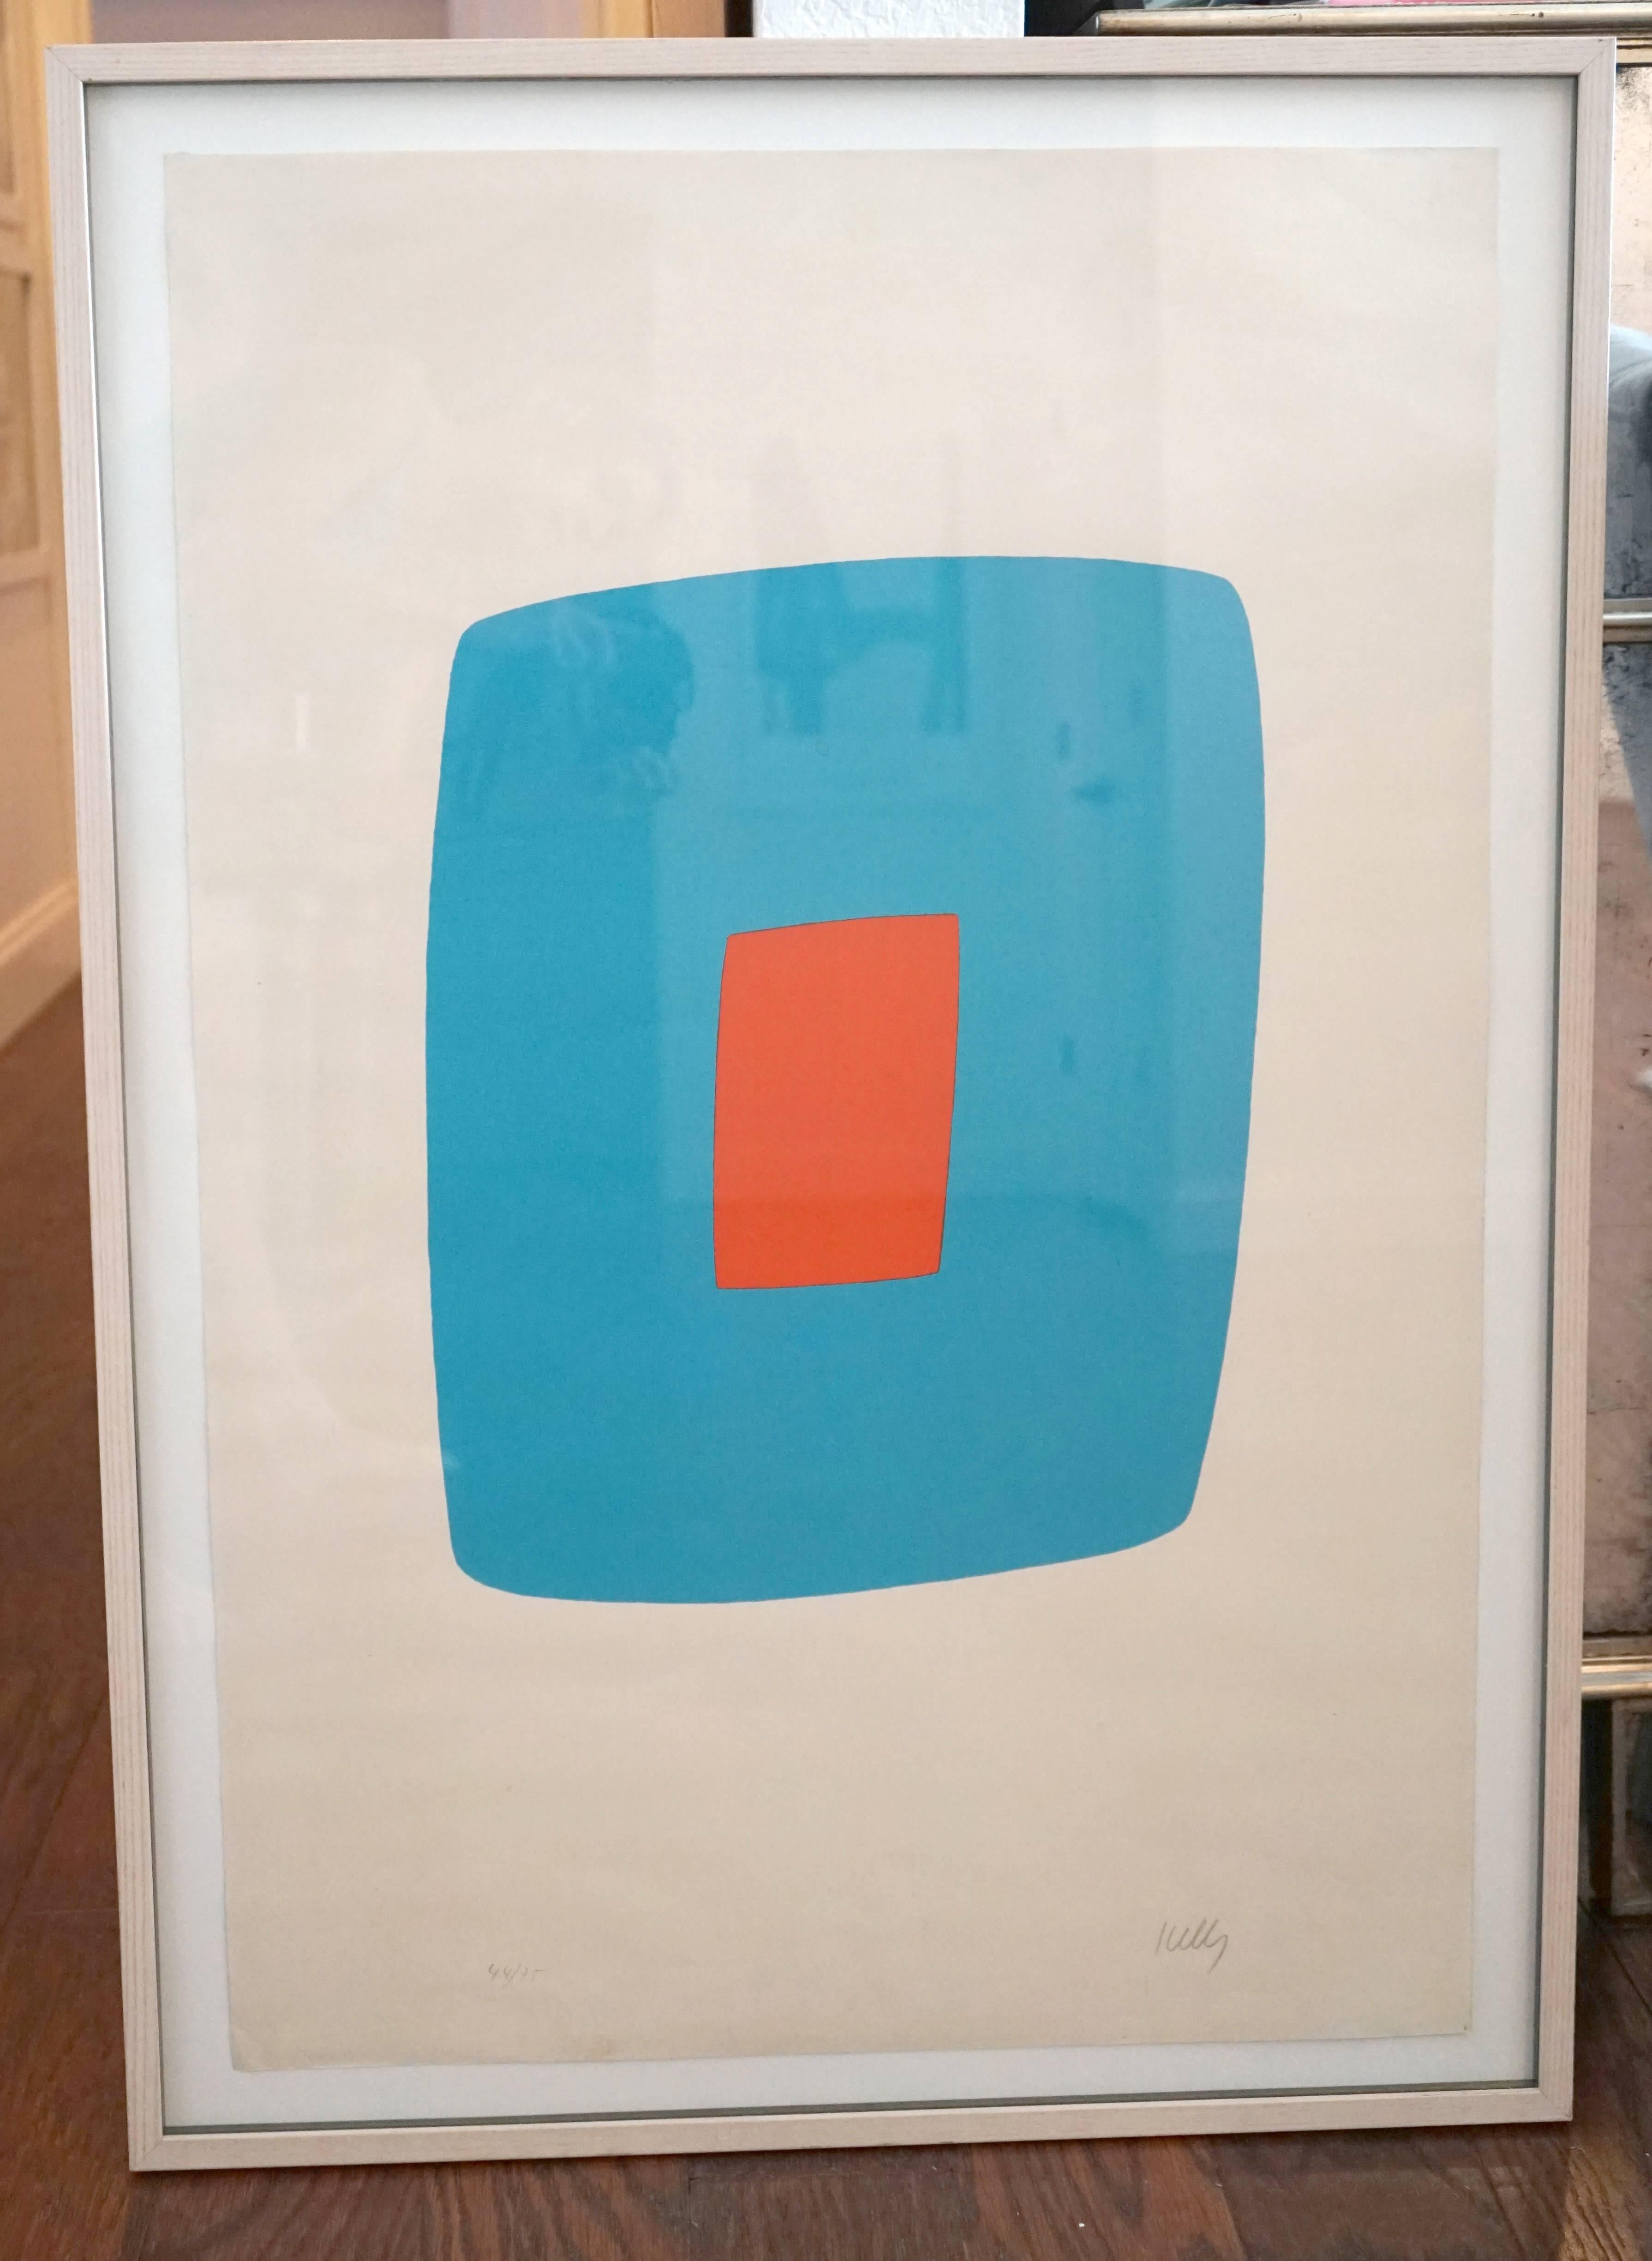 Artist: Ellsworth Kelly
Title: Light Blue with Orange (Bleu clair avec orange) from Suite of Twenty-Seven Color Lithographs
One from a series of twenty-seven lithographs
Year: 1964-1965
Medium: Lithograph on Rives paper
Signed and numbered in the